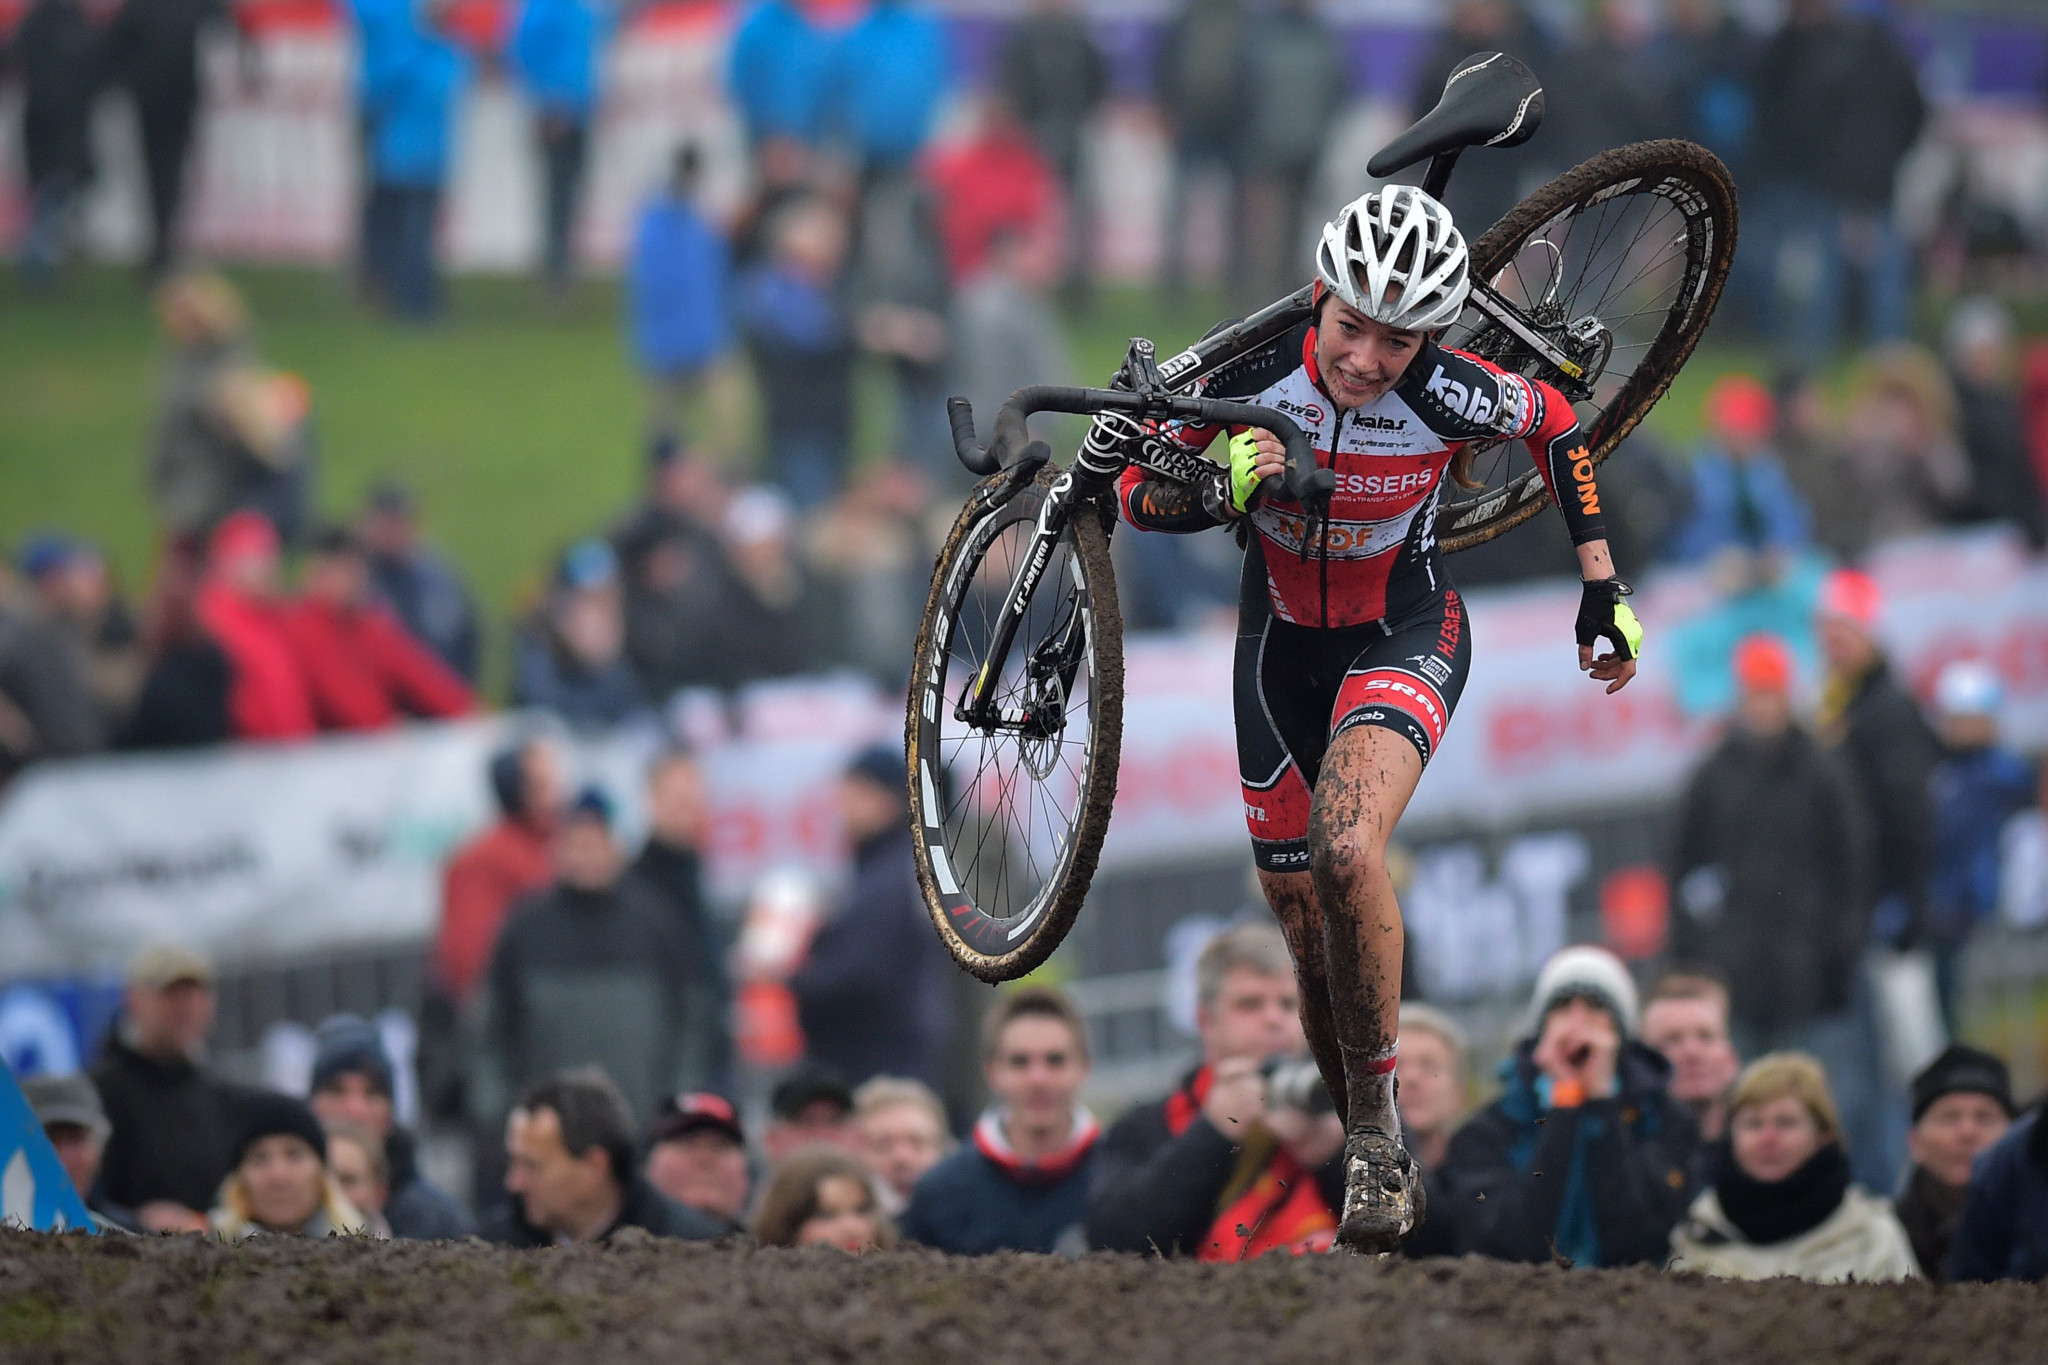 Woensdrecht, which hosts a Cyclo-cross World Cup in Hoogerheide, is one of two Dutch locations recognised ©Getty Images